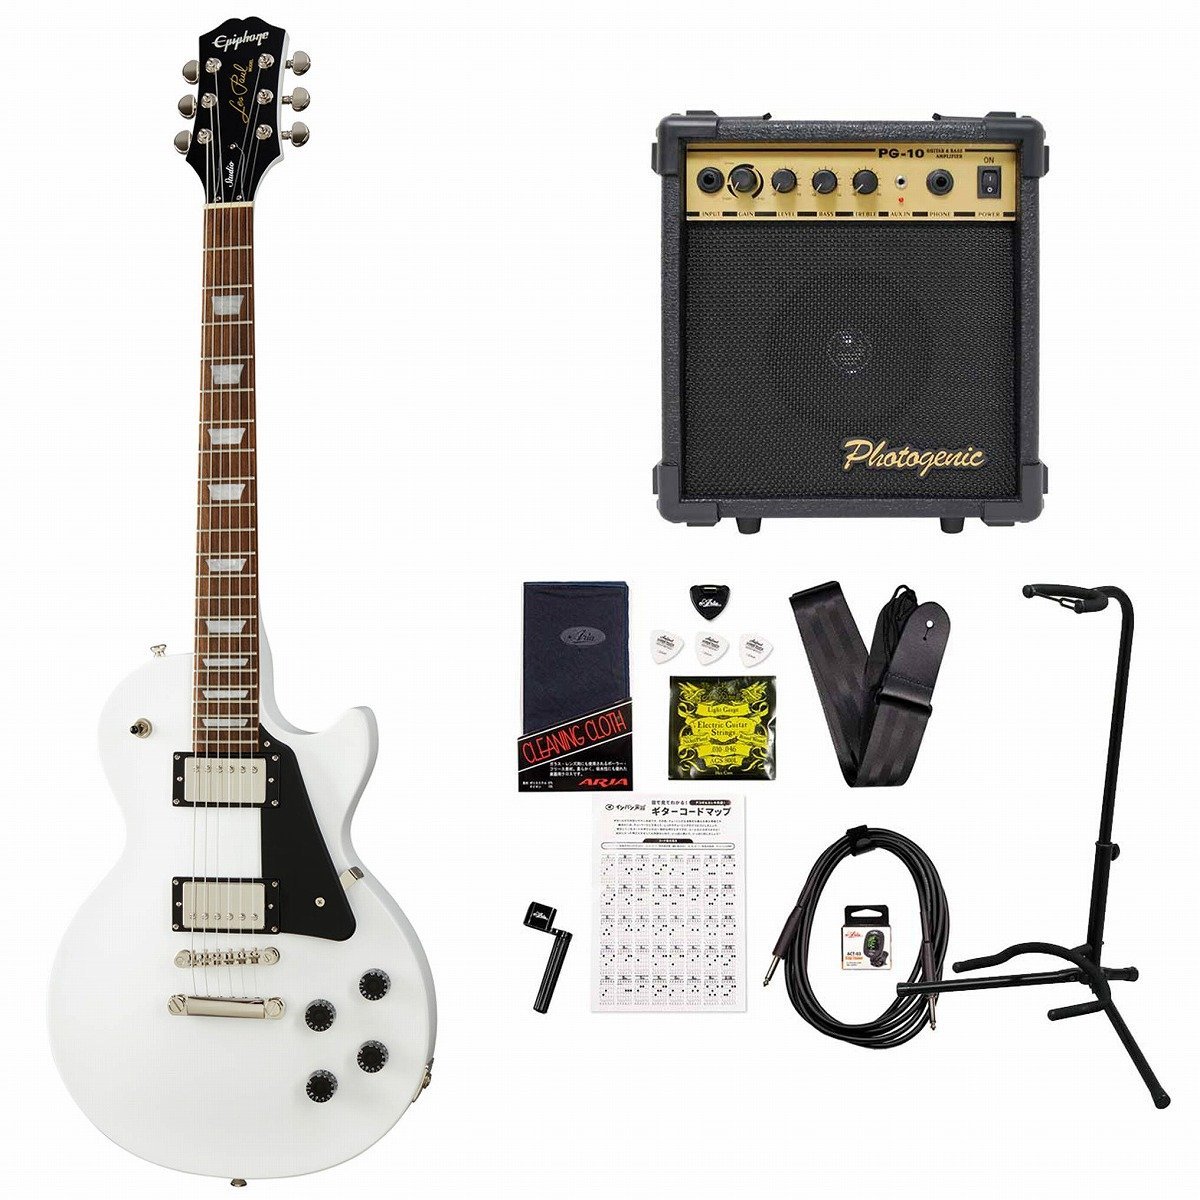 Epiphone inspired by Gibson Les Paul Studio Alpine White